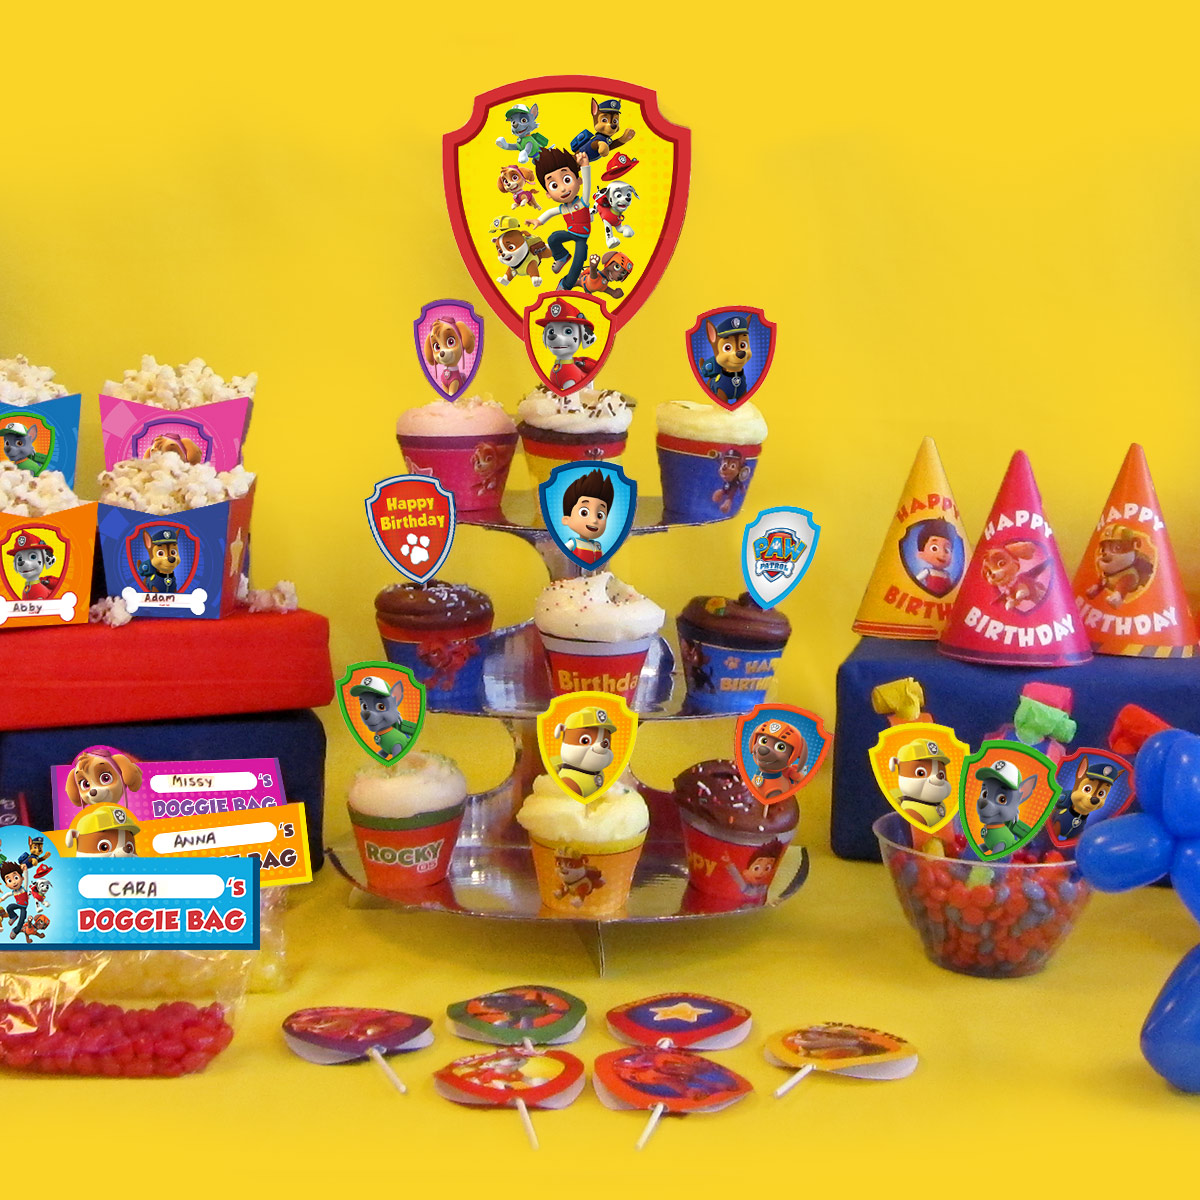 PAW Patrol Party Planner